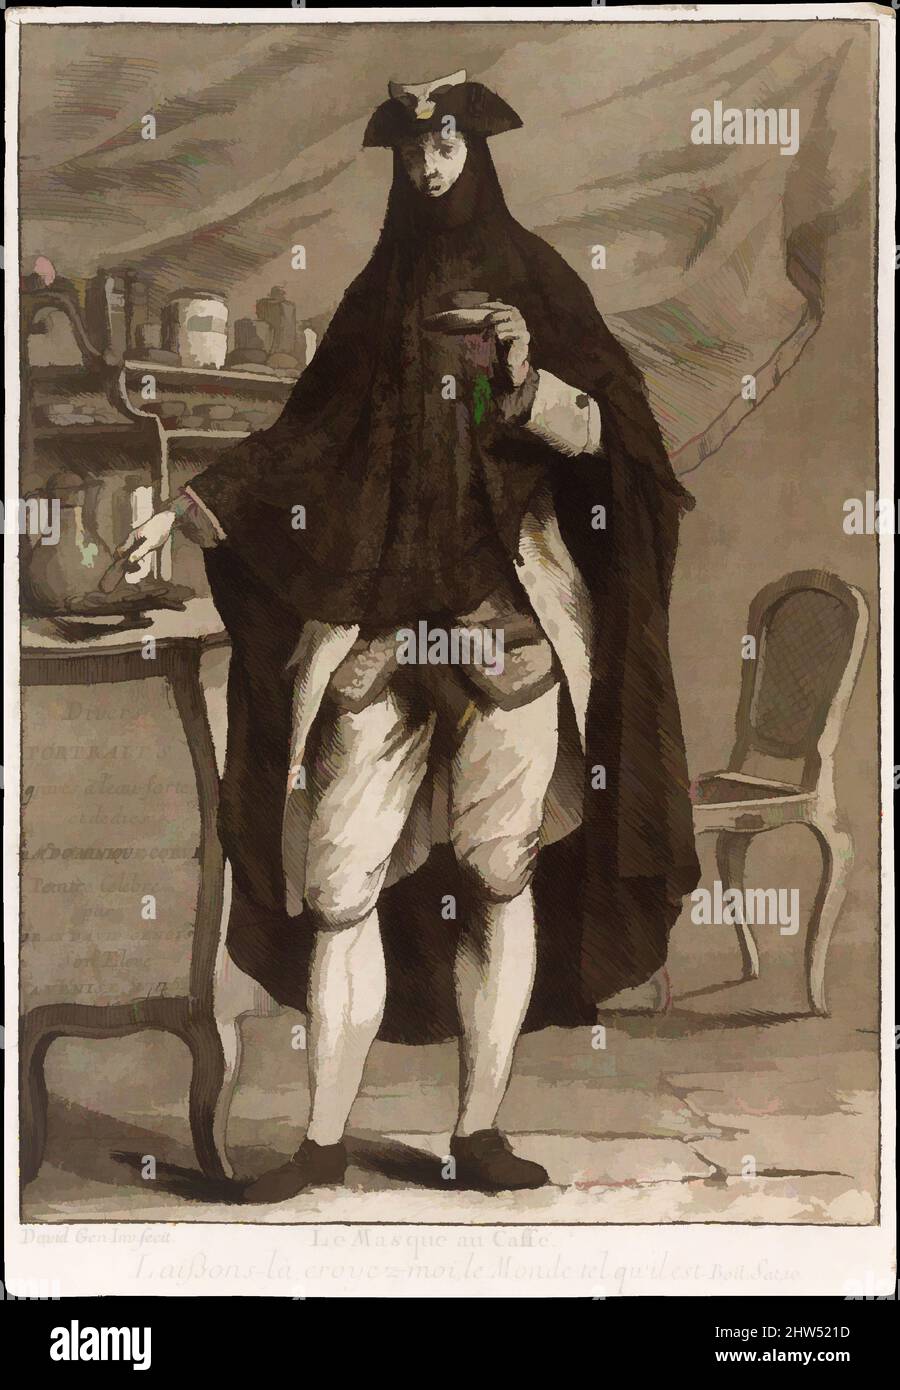 Art inspired by A man wearing a mask drinking a cup of coffee (Le Masque au Caffé), Title page to 'Divers Portraits', 1775, Etching and aquatint, plate: 9 5/16 x 6 1/2 in. (23.7 x 16.5 cm), Prints, Giovanni David (Italian, Cabella Ligure 1749–1790 Genoa), Most of Giovanni David's, Classic works modernized by Artotop with a splash of modernity. Shapes, color and value, eye-catching visual impact on art. Emotions through freedom of artworks in a contemporary way. A timeless message pursuing a wildly creative new direction. Artists turning to the digital medium and creating the Artotop NFT Stock Photo